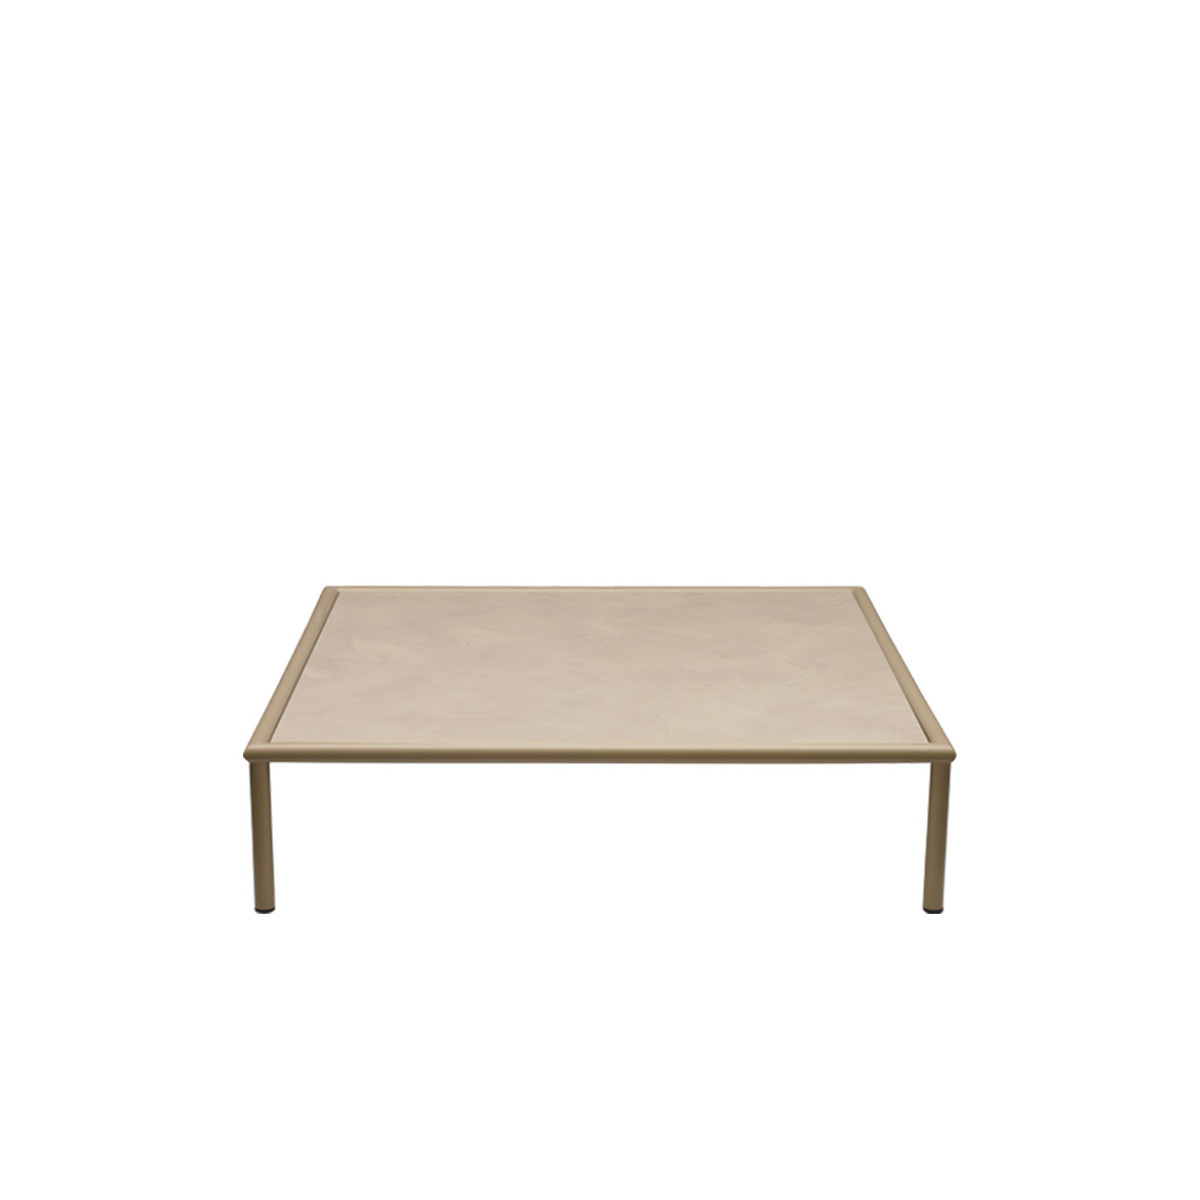 Flap - occasional table